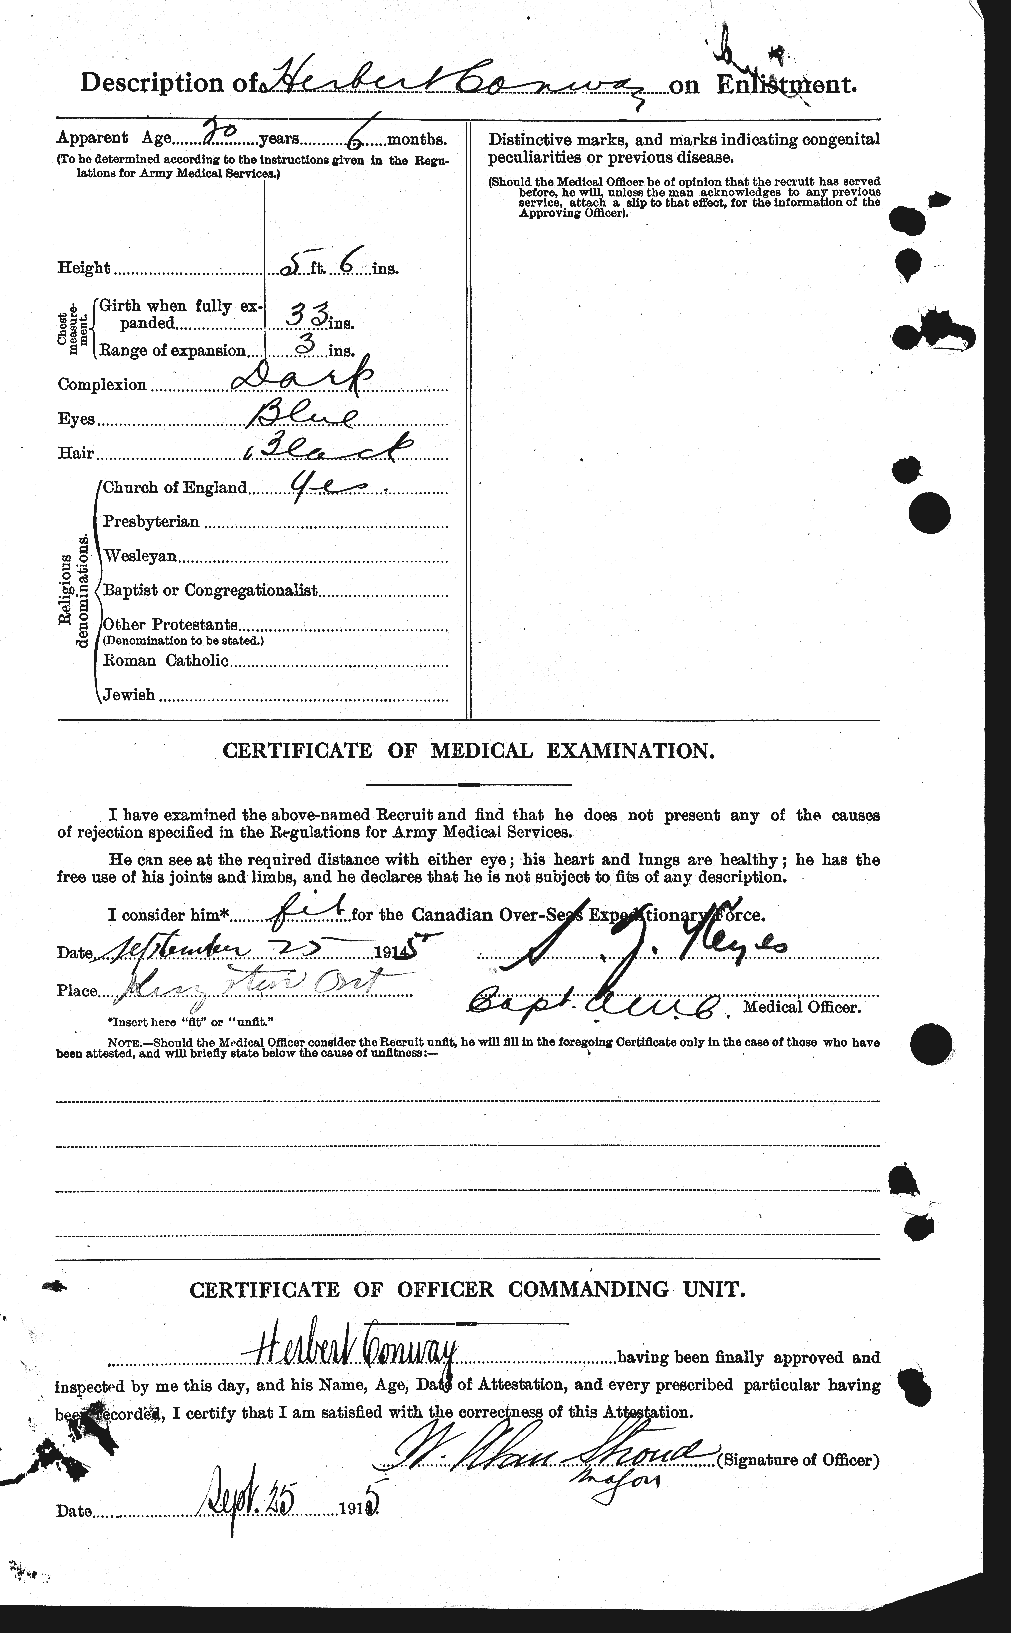 Personnel Records of the First World War - CEF 073362b